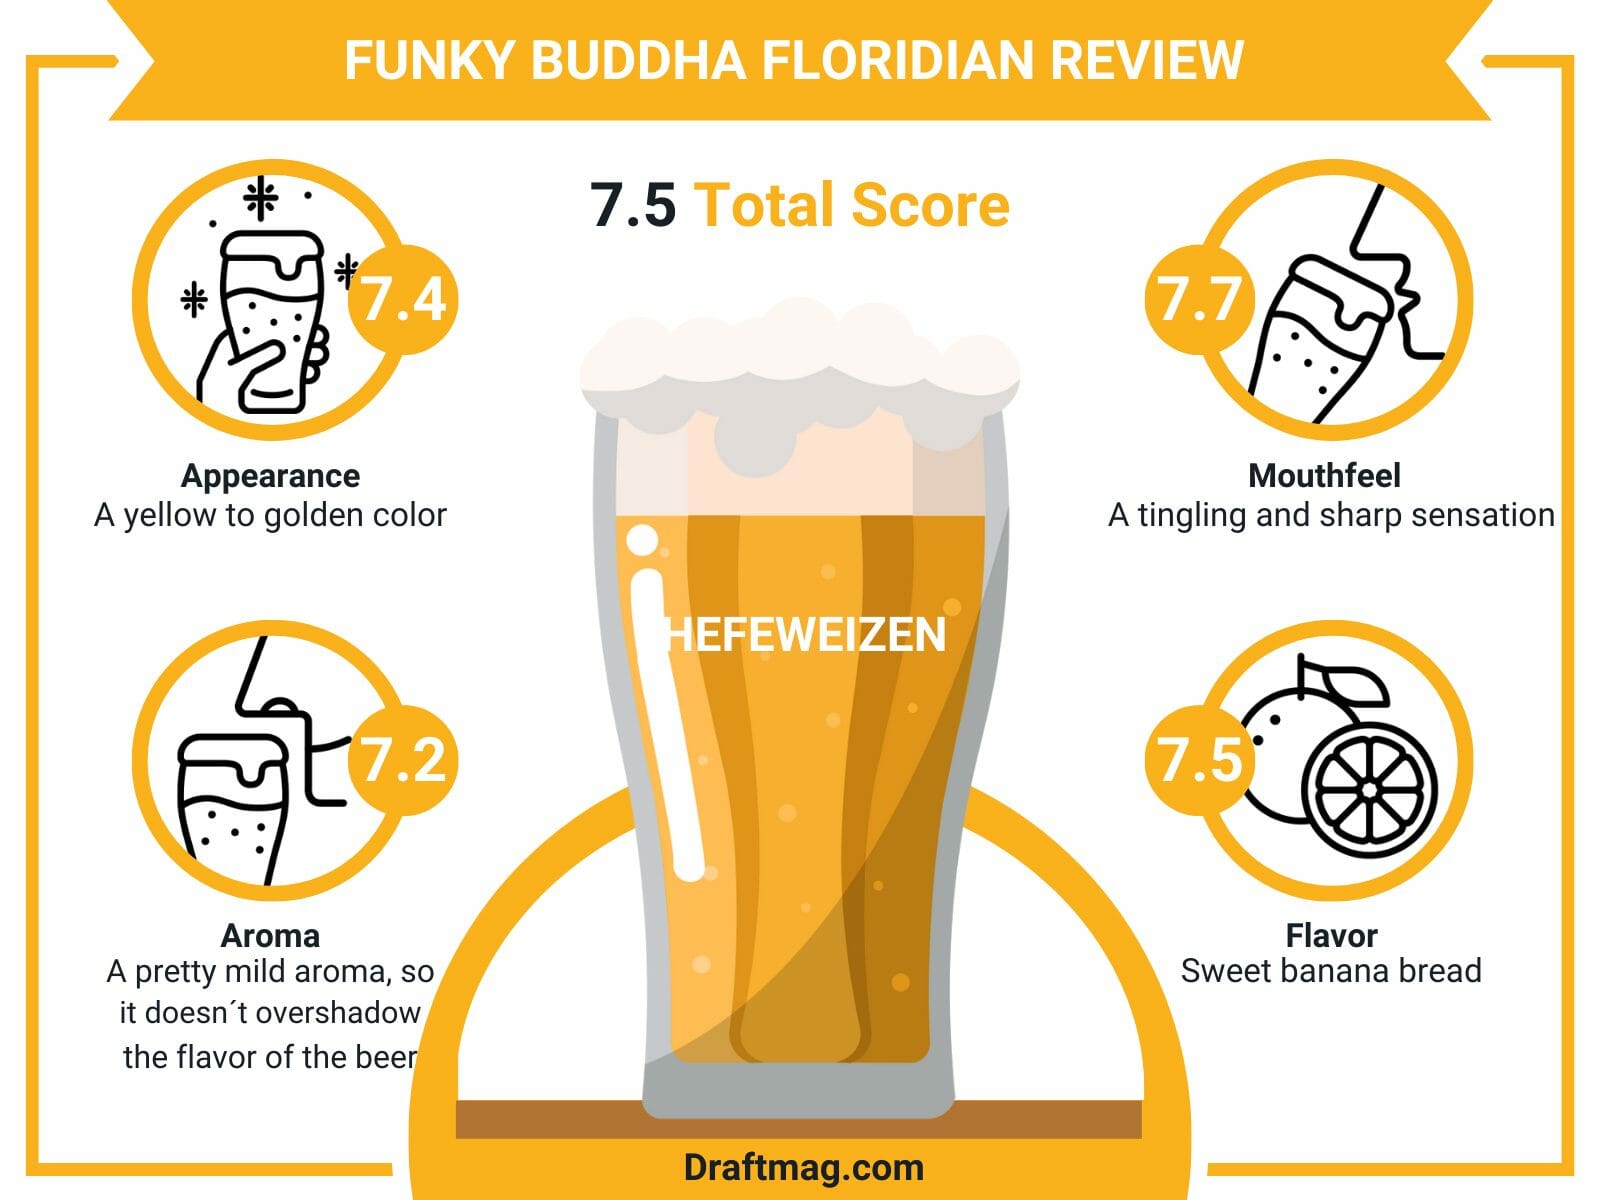 Funky buddha floridian review infographic